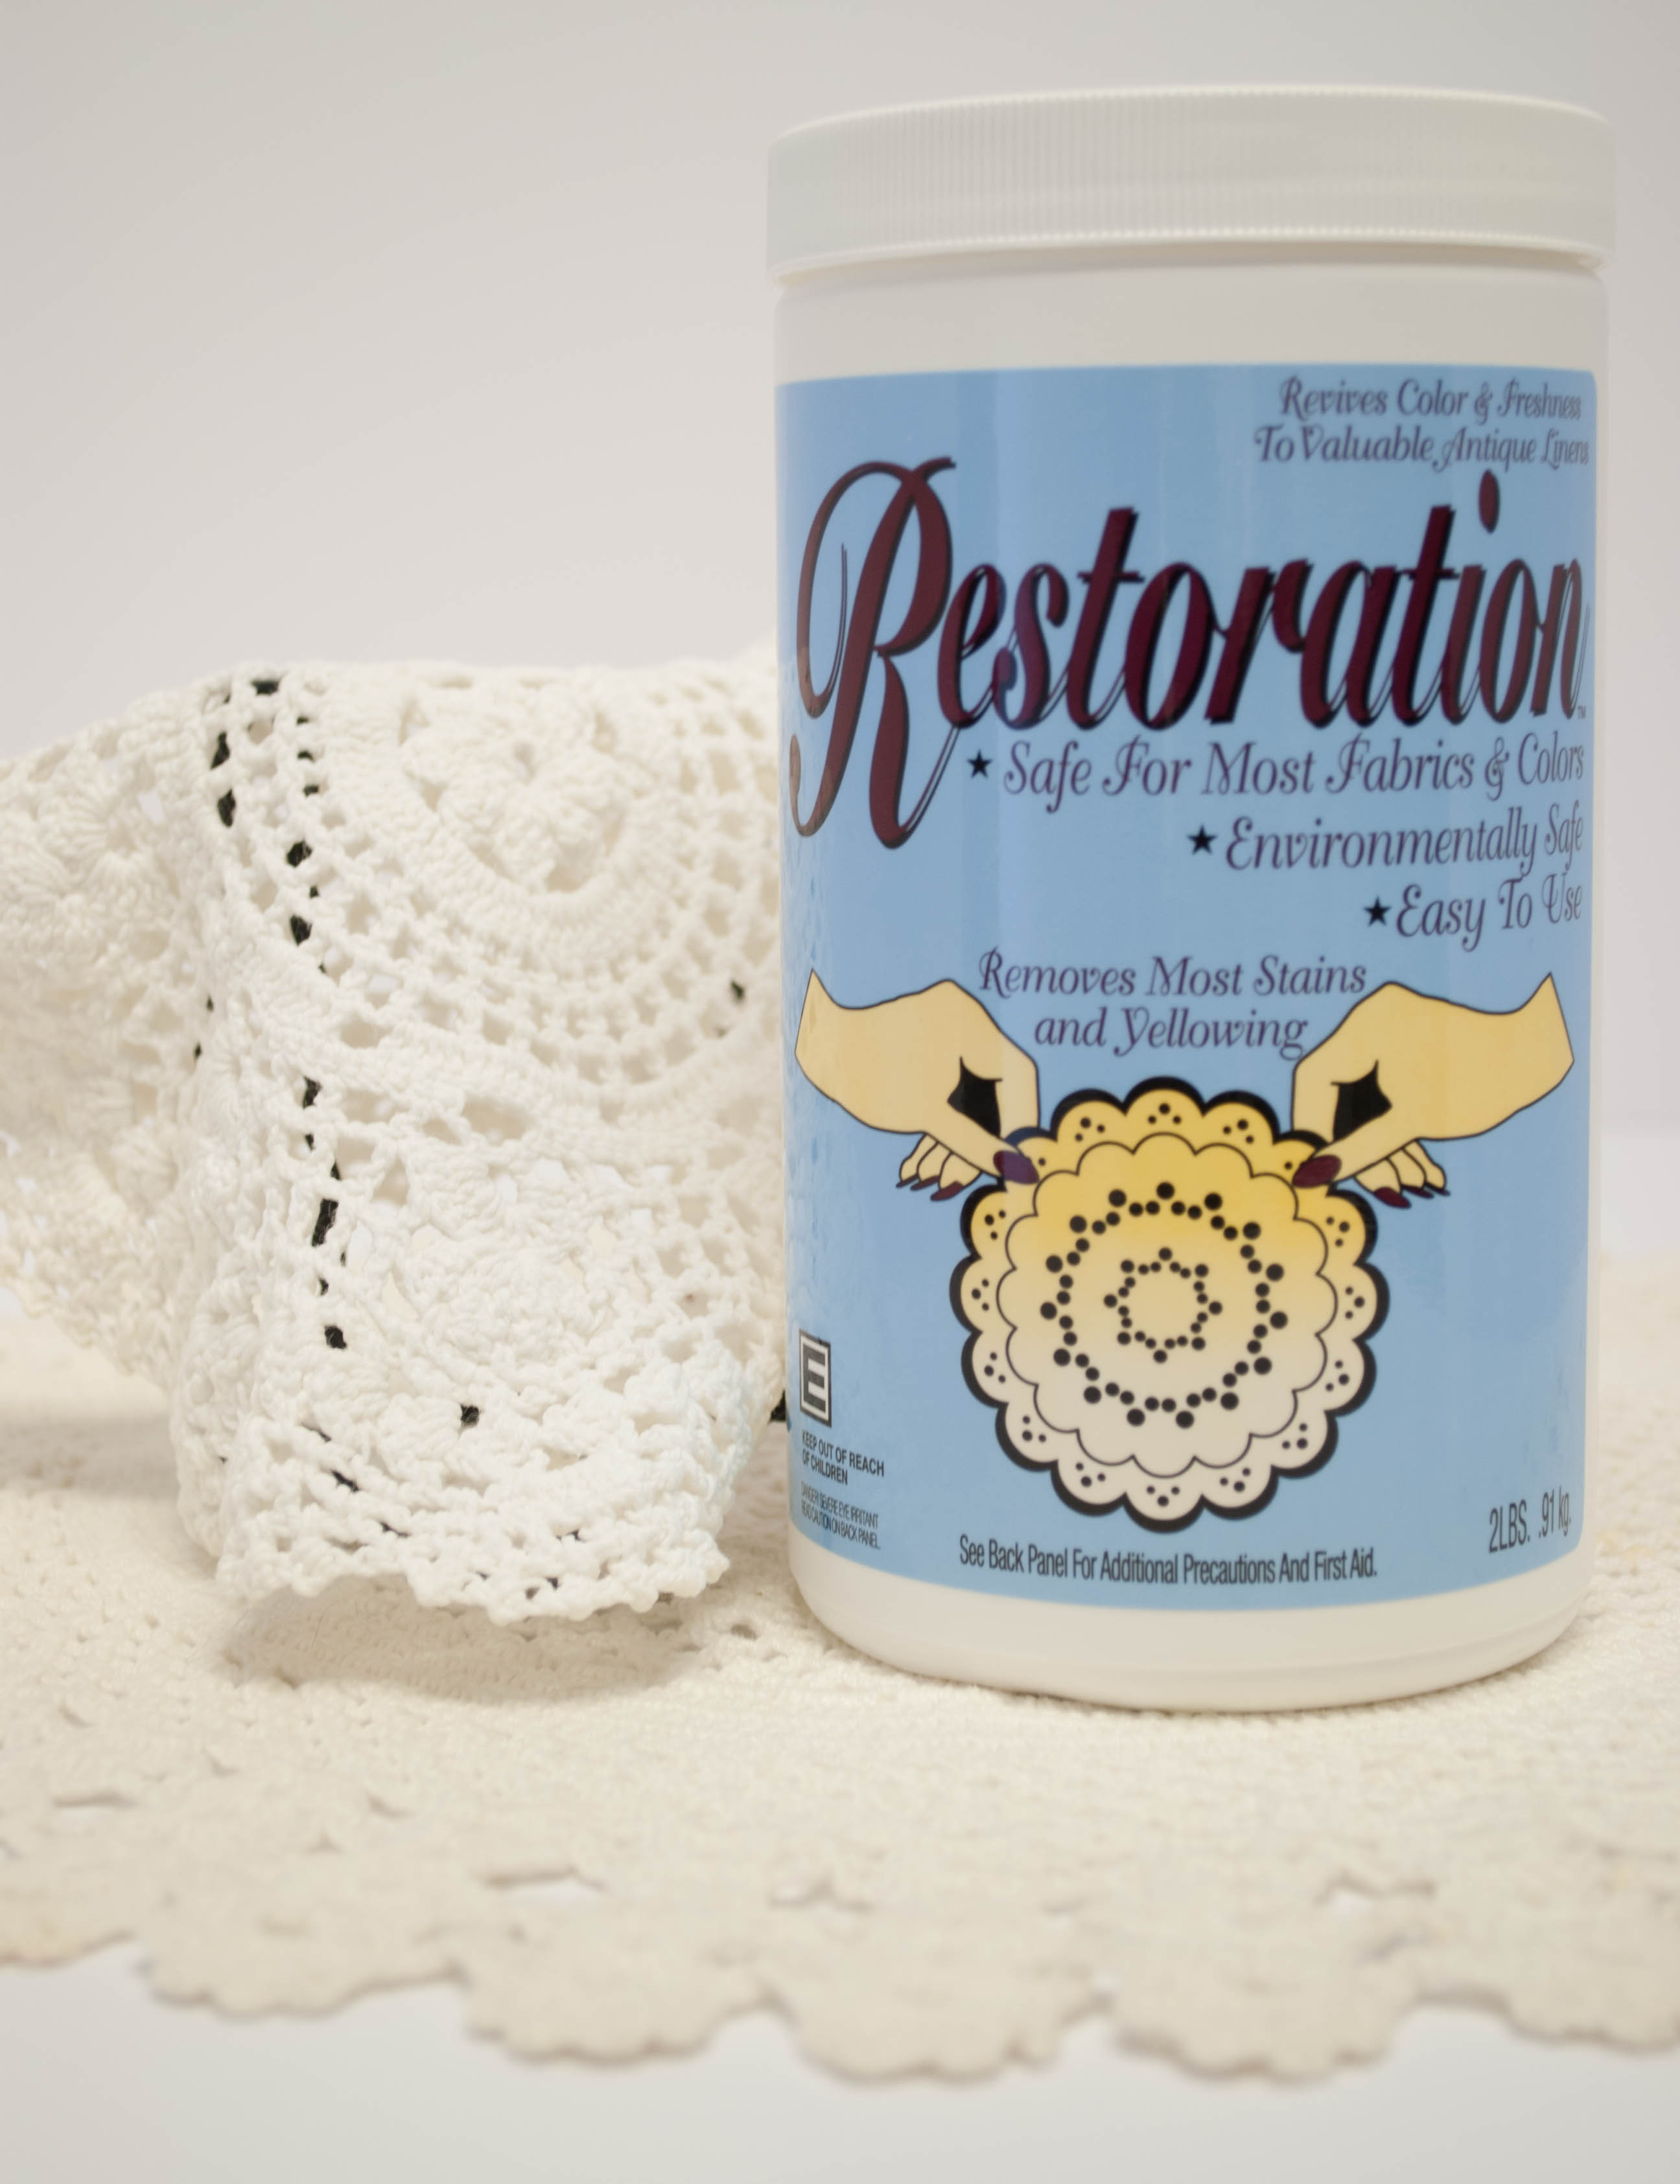 Restoration Fabric Cleaner 2lb Canister (ORMD)